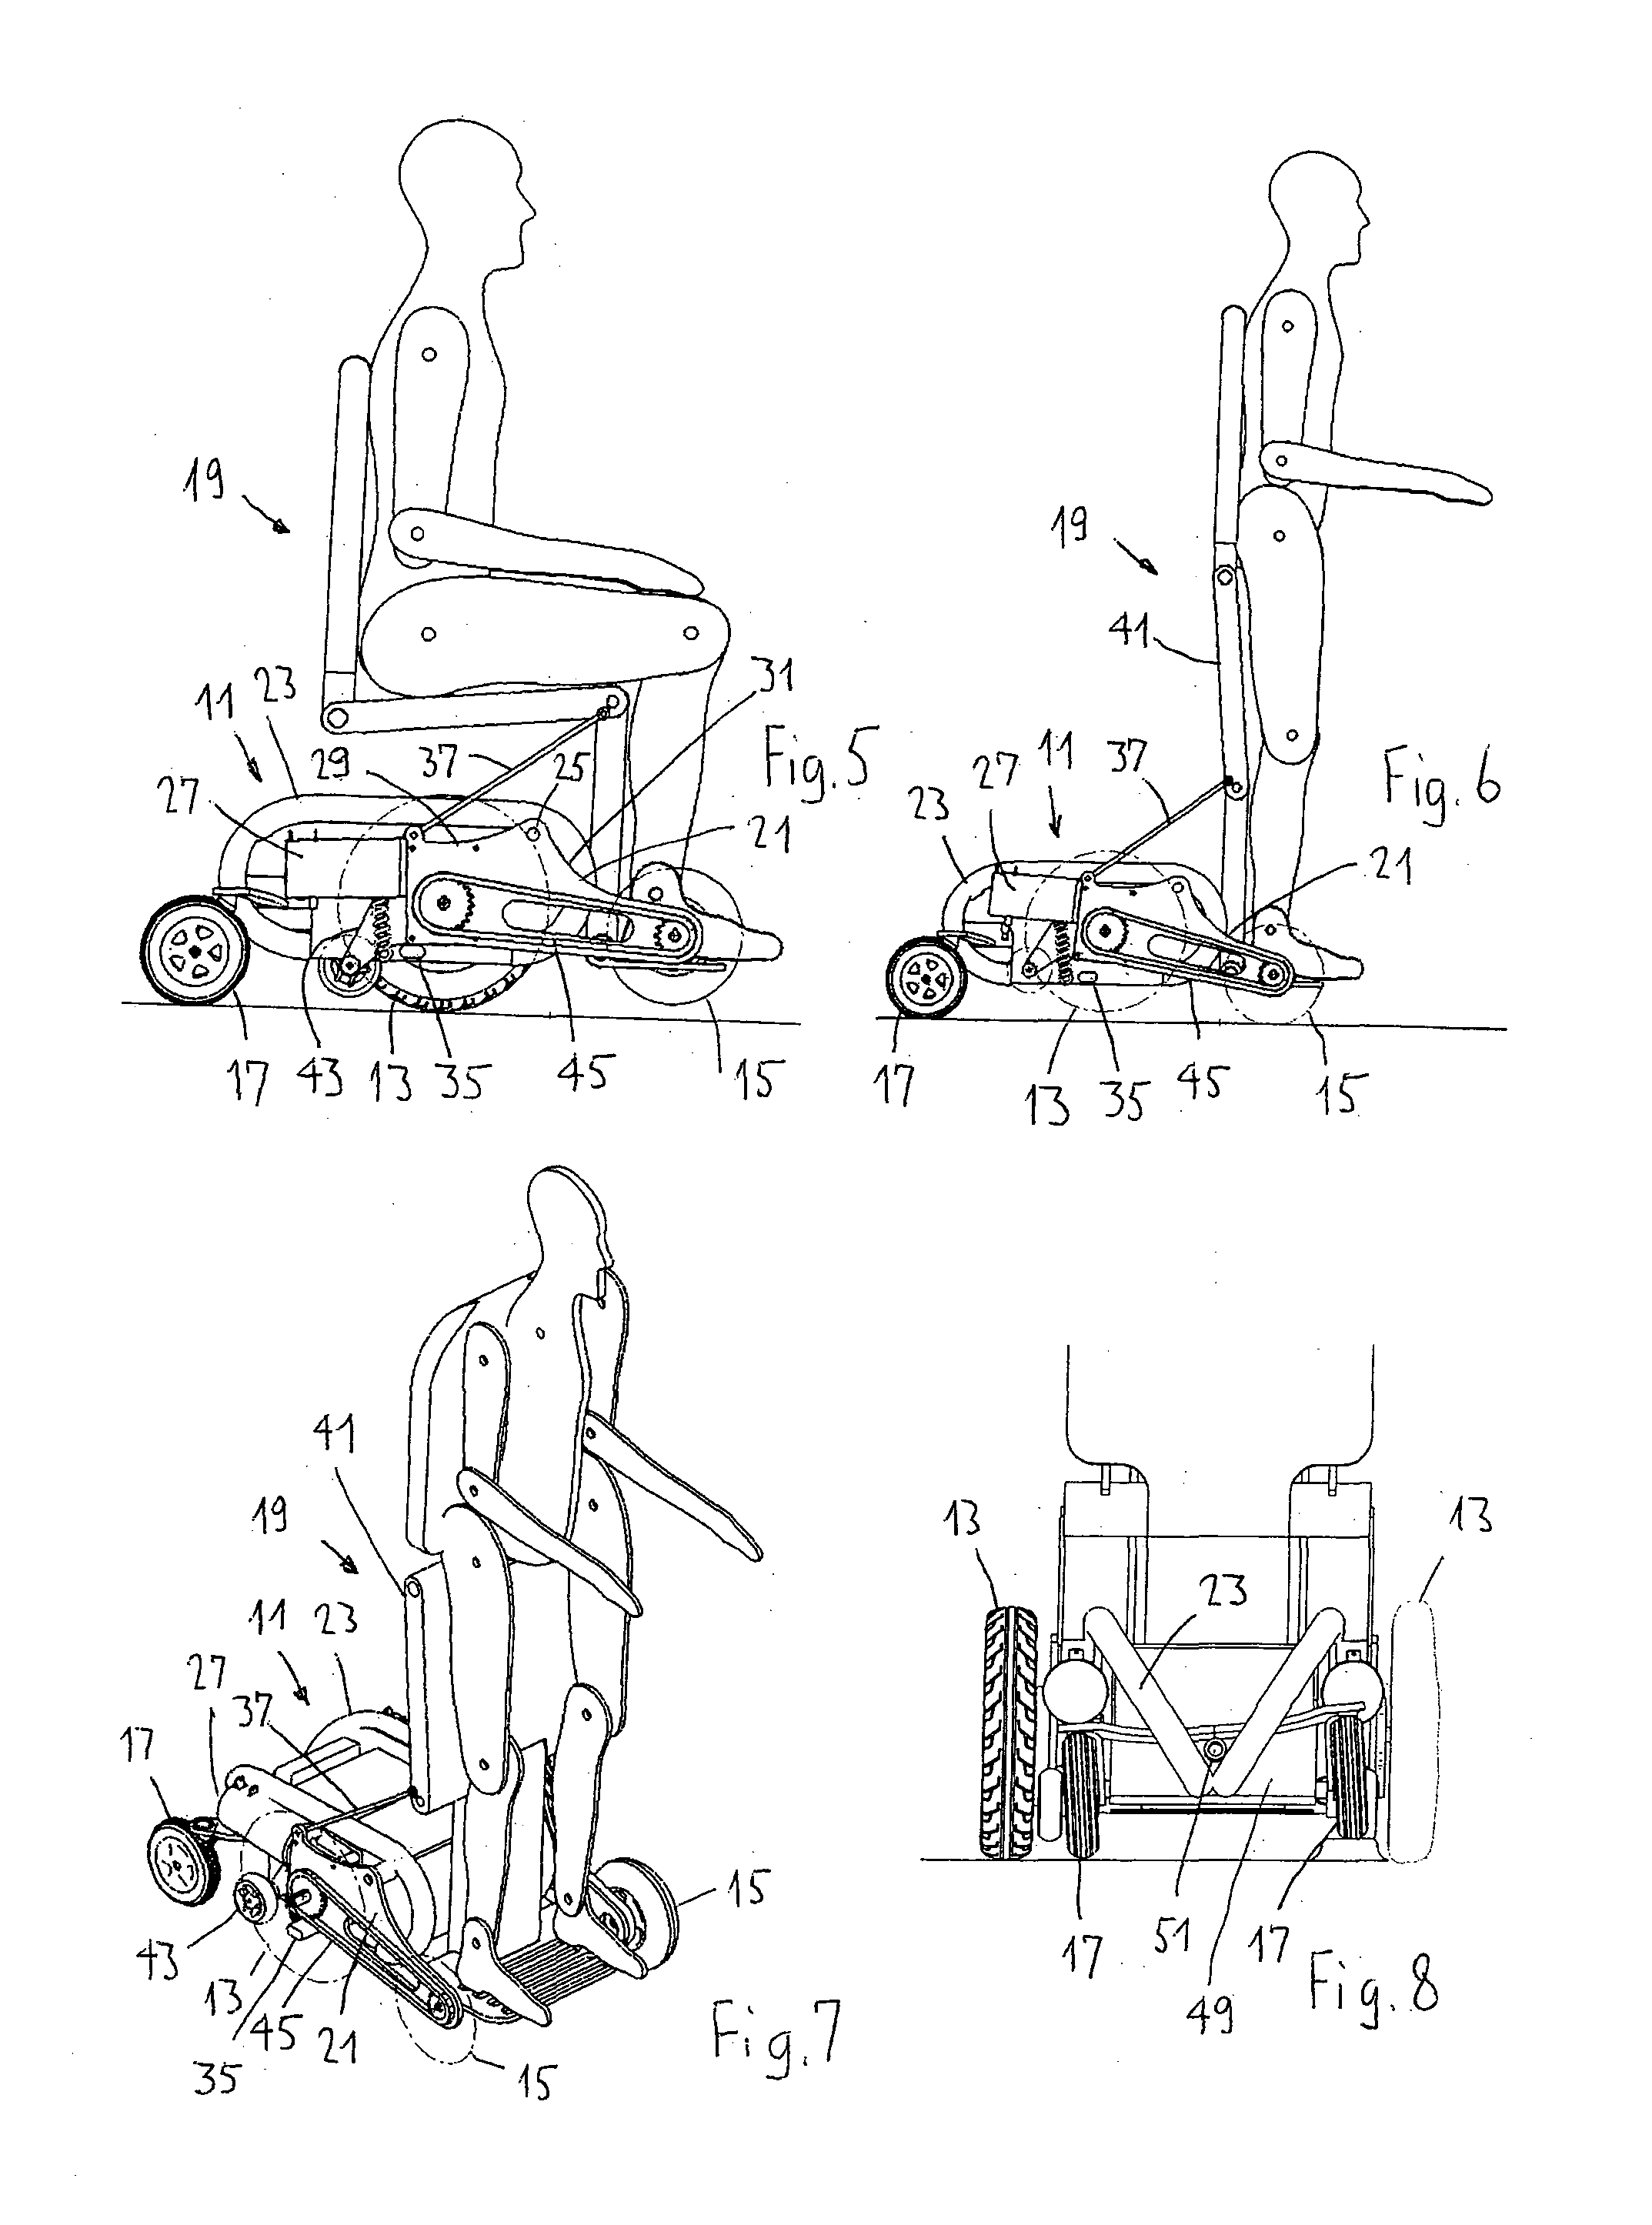 Vehicle with central wheel drive, in particular a wheelchair or stand-up wheelchair